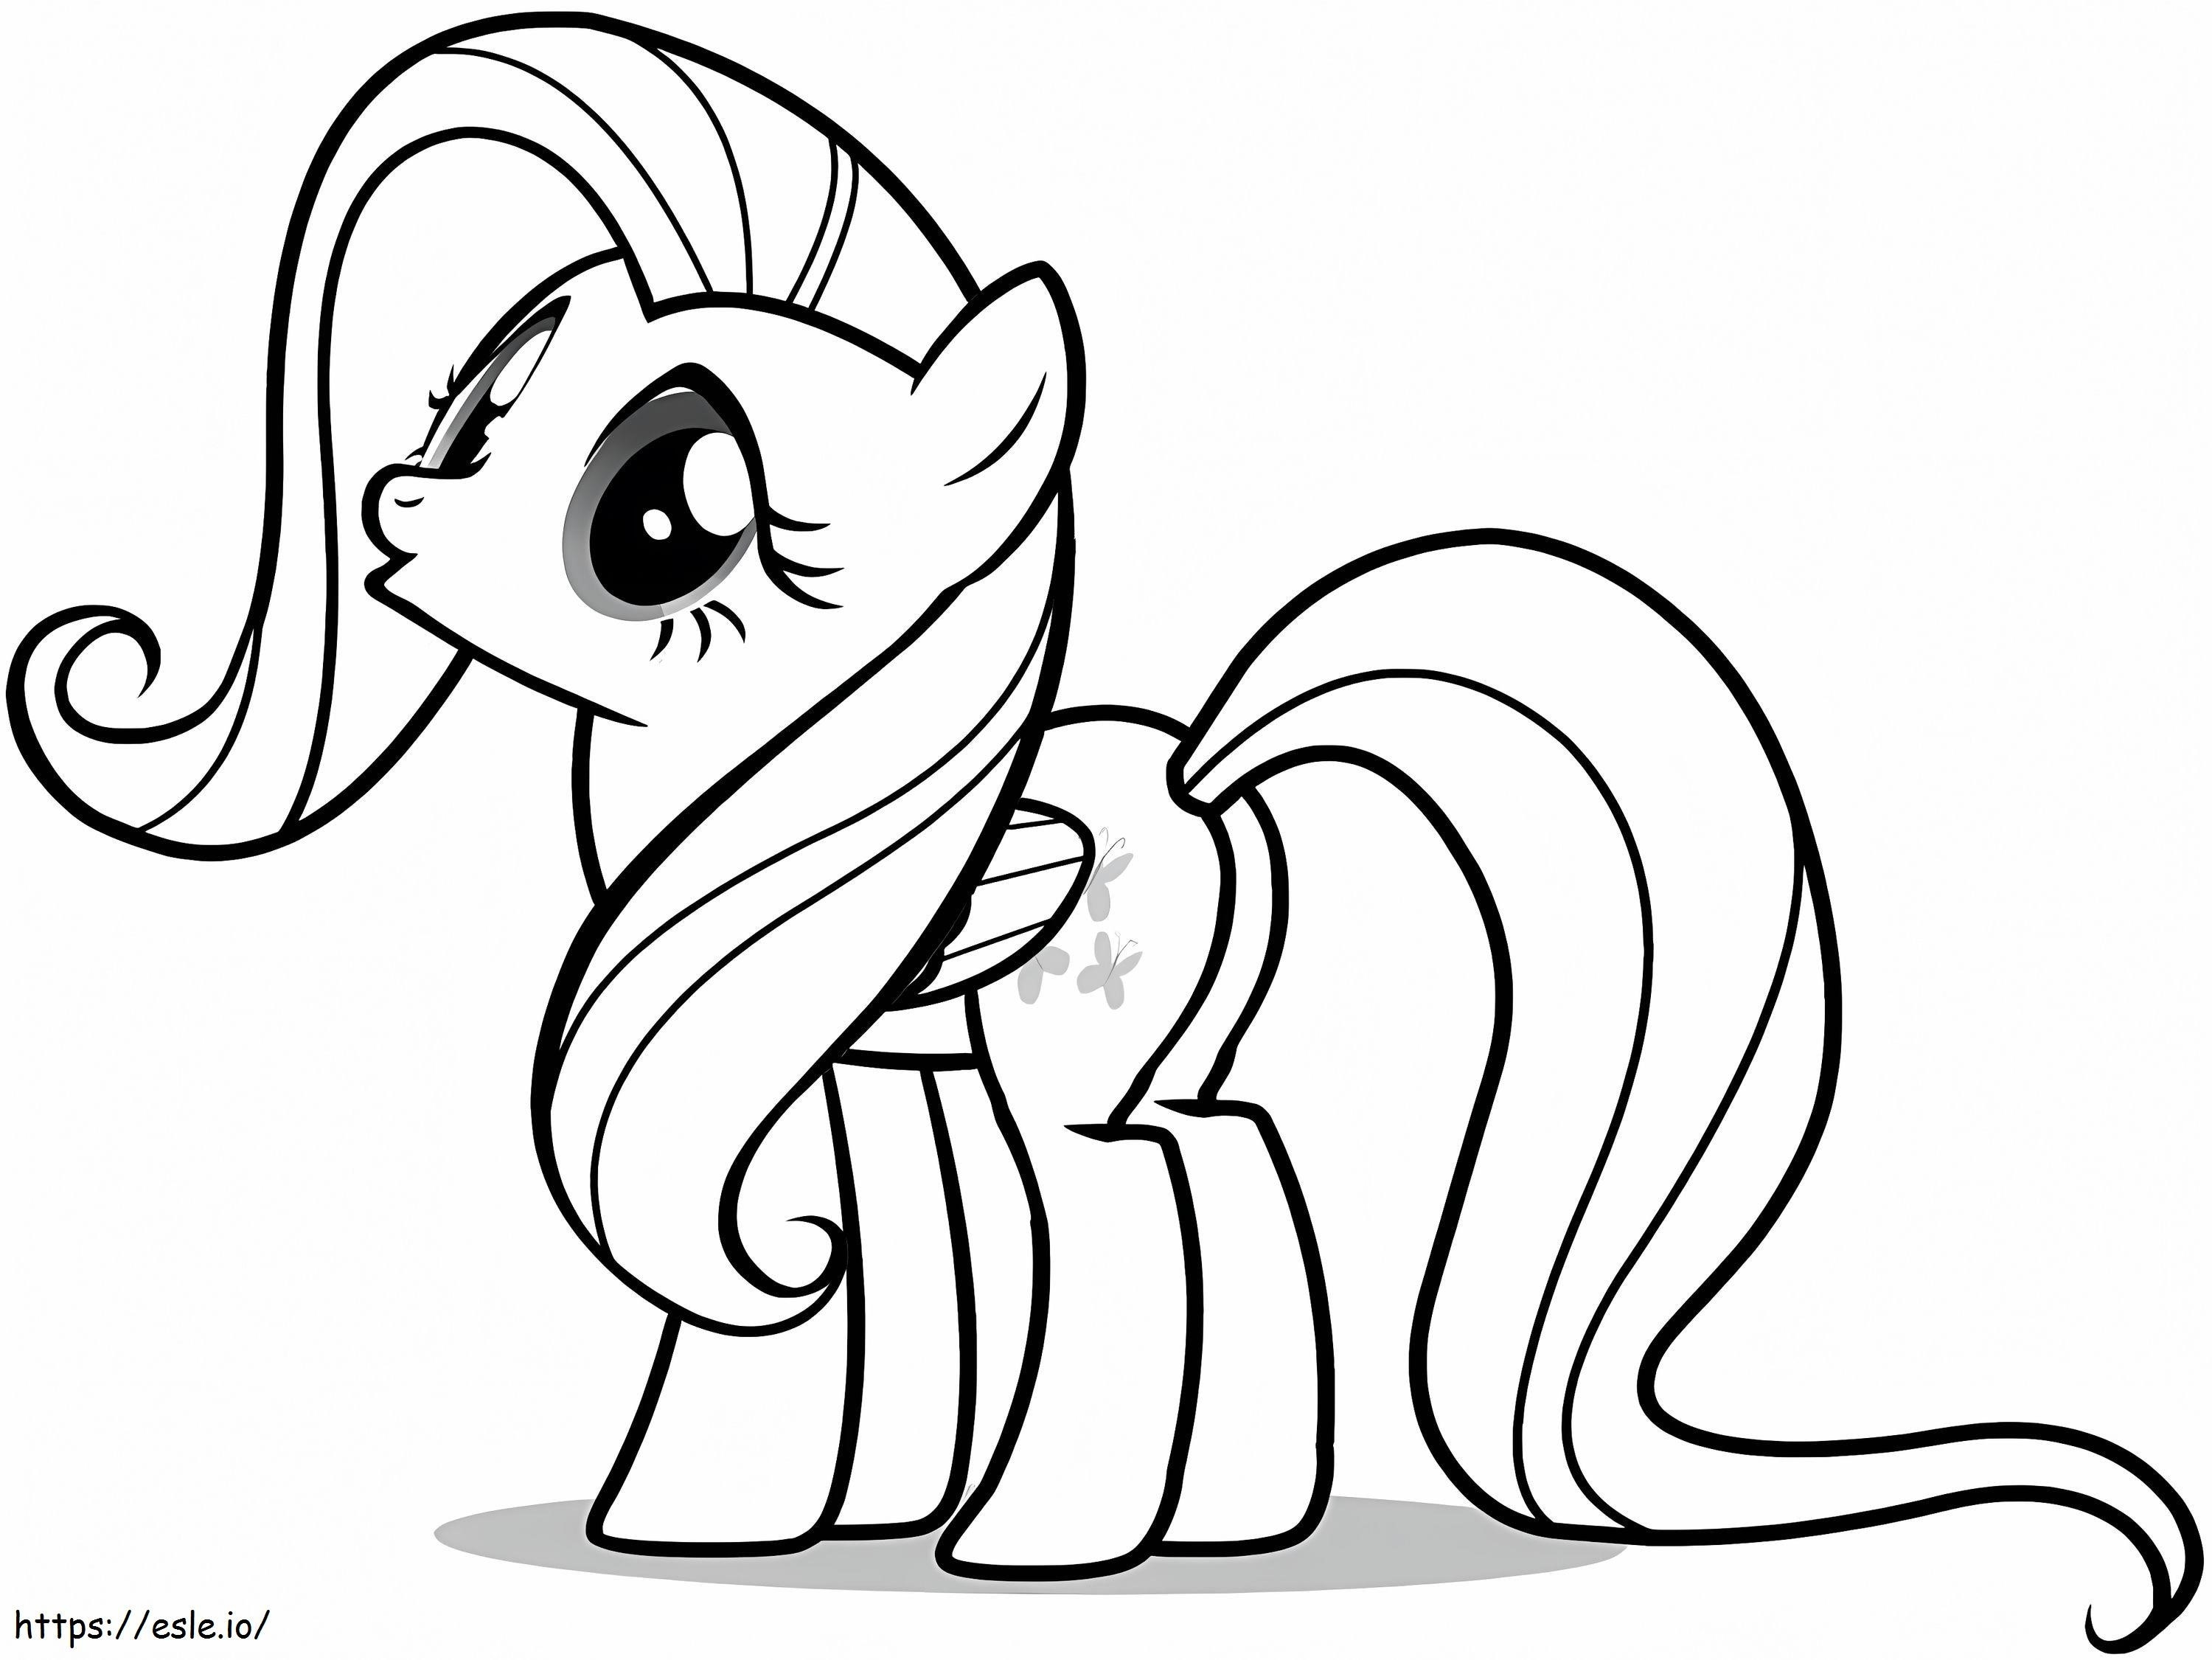 Fluttershy 3 coloring page